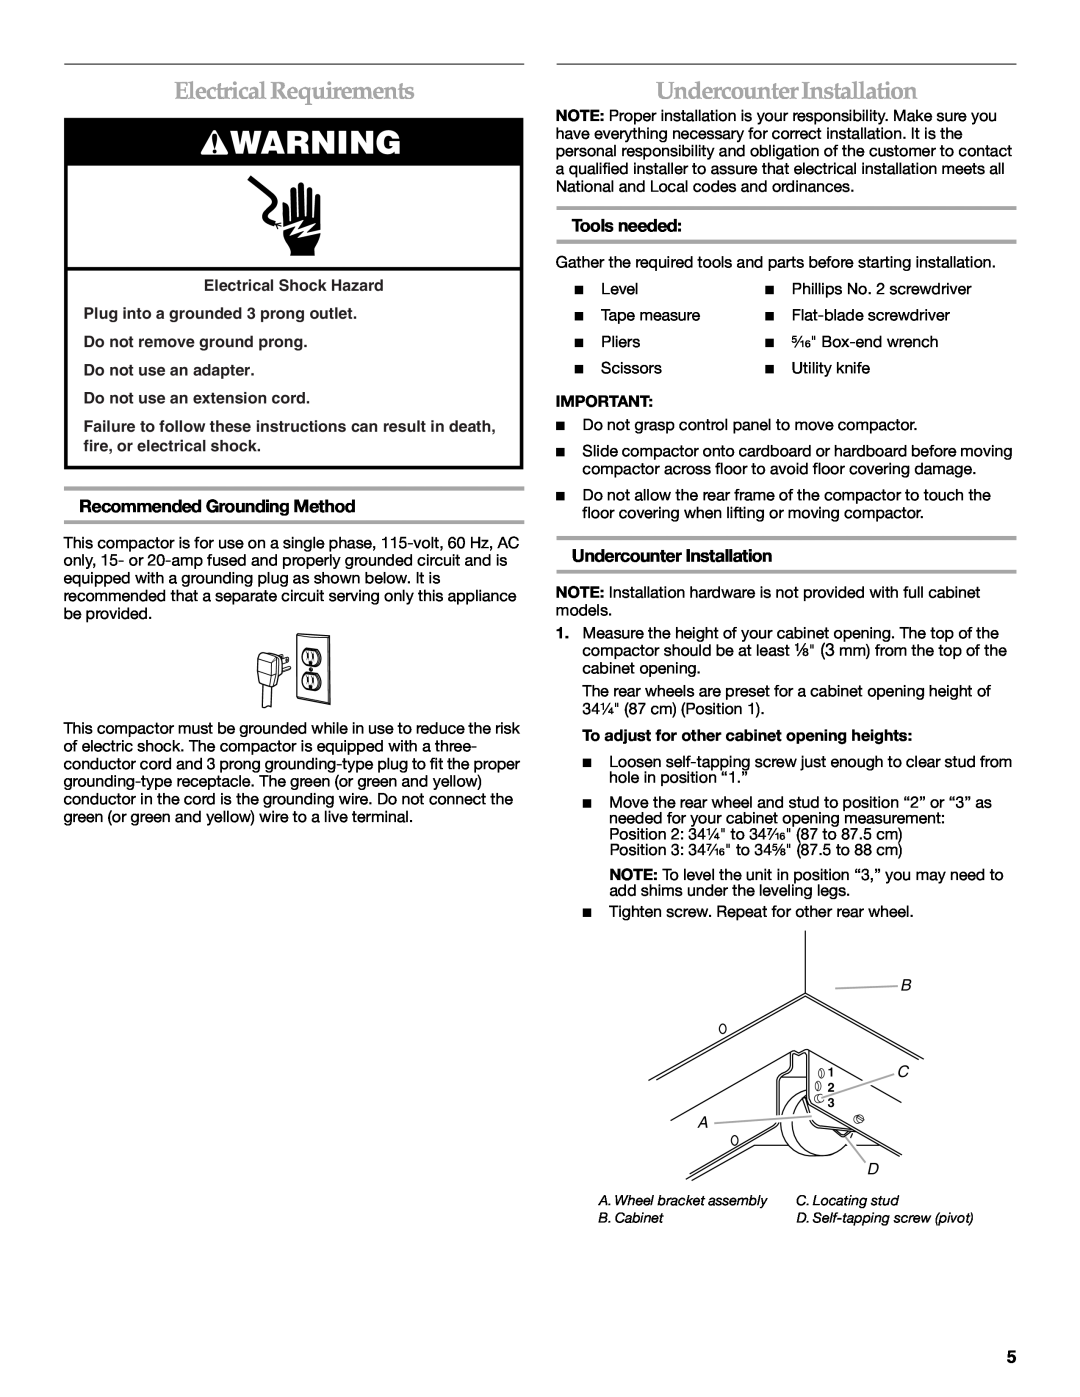 KitchenAid 9872215B manual Electrical Requirements, UndercounterInstallation, Recommended Grounding Method, Tools needed 